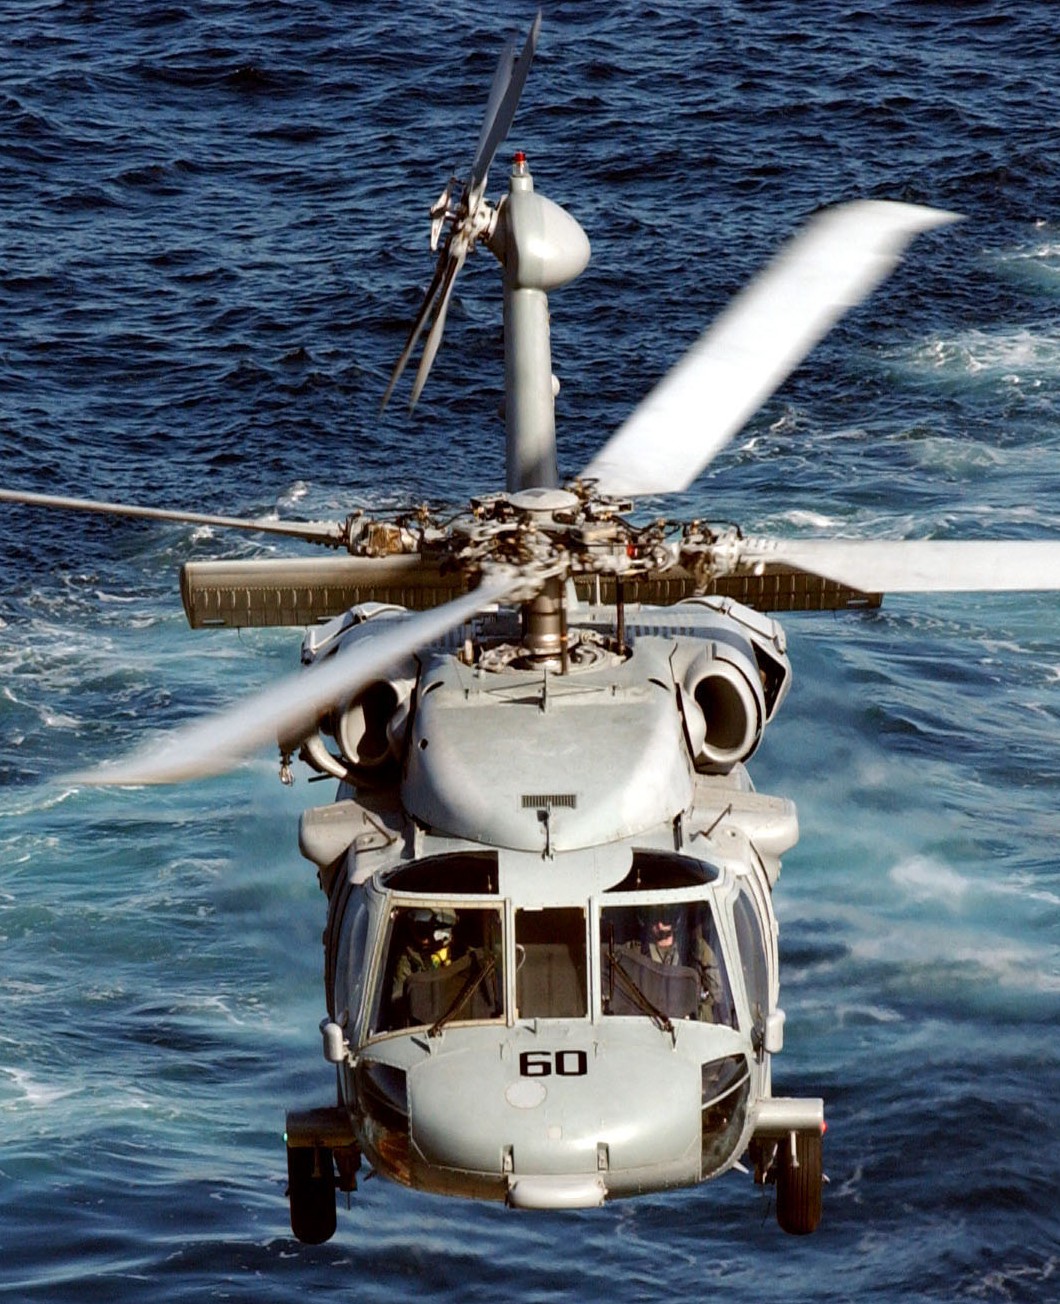 hc-11 gunbearers helicopter combat support squadron navy mh-60s seahawk 13